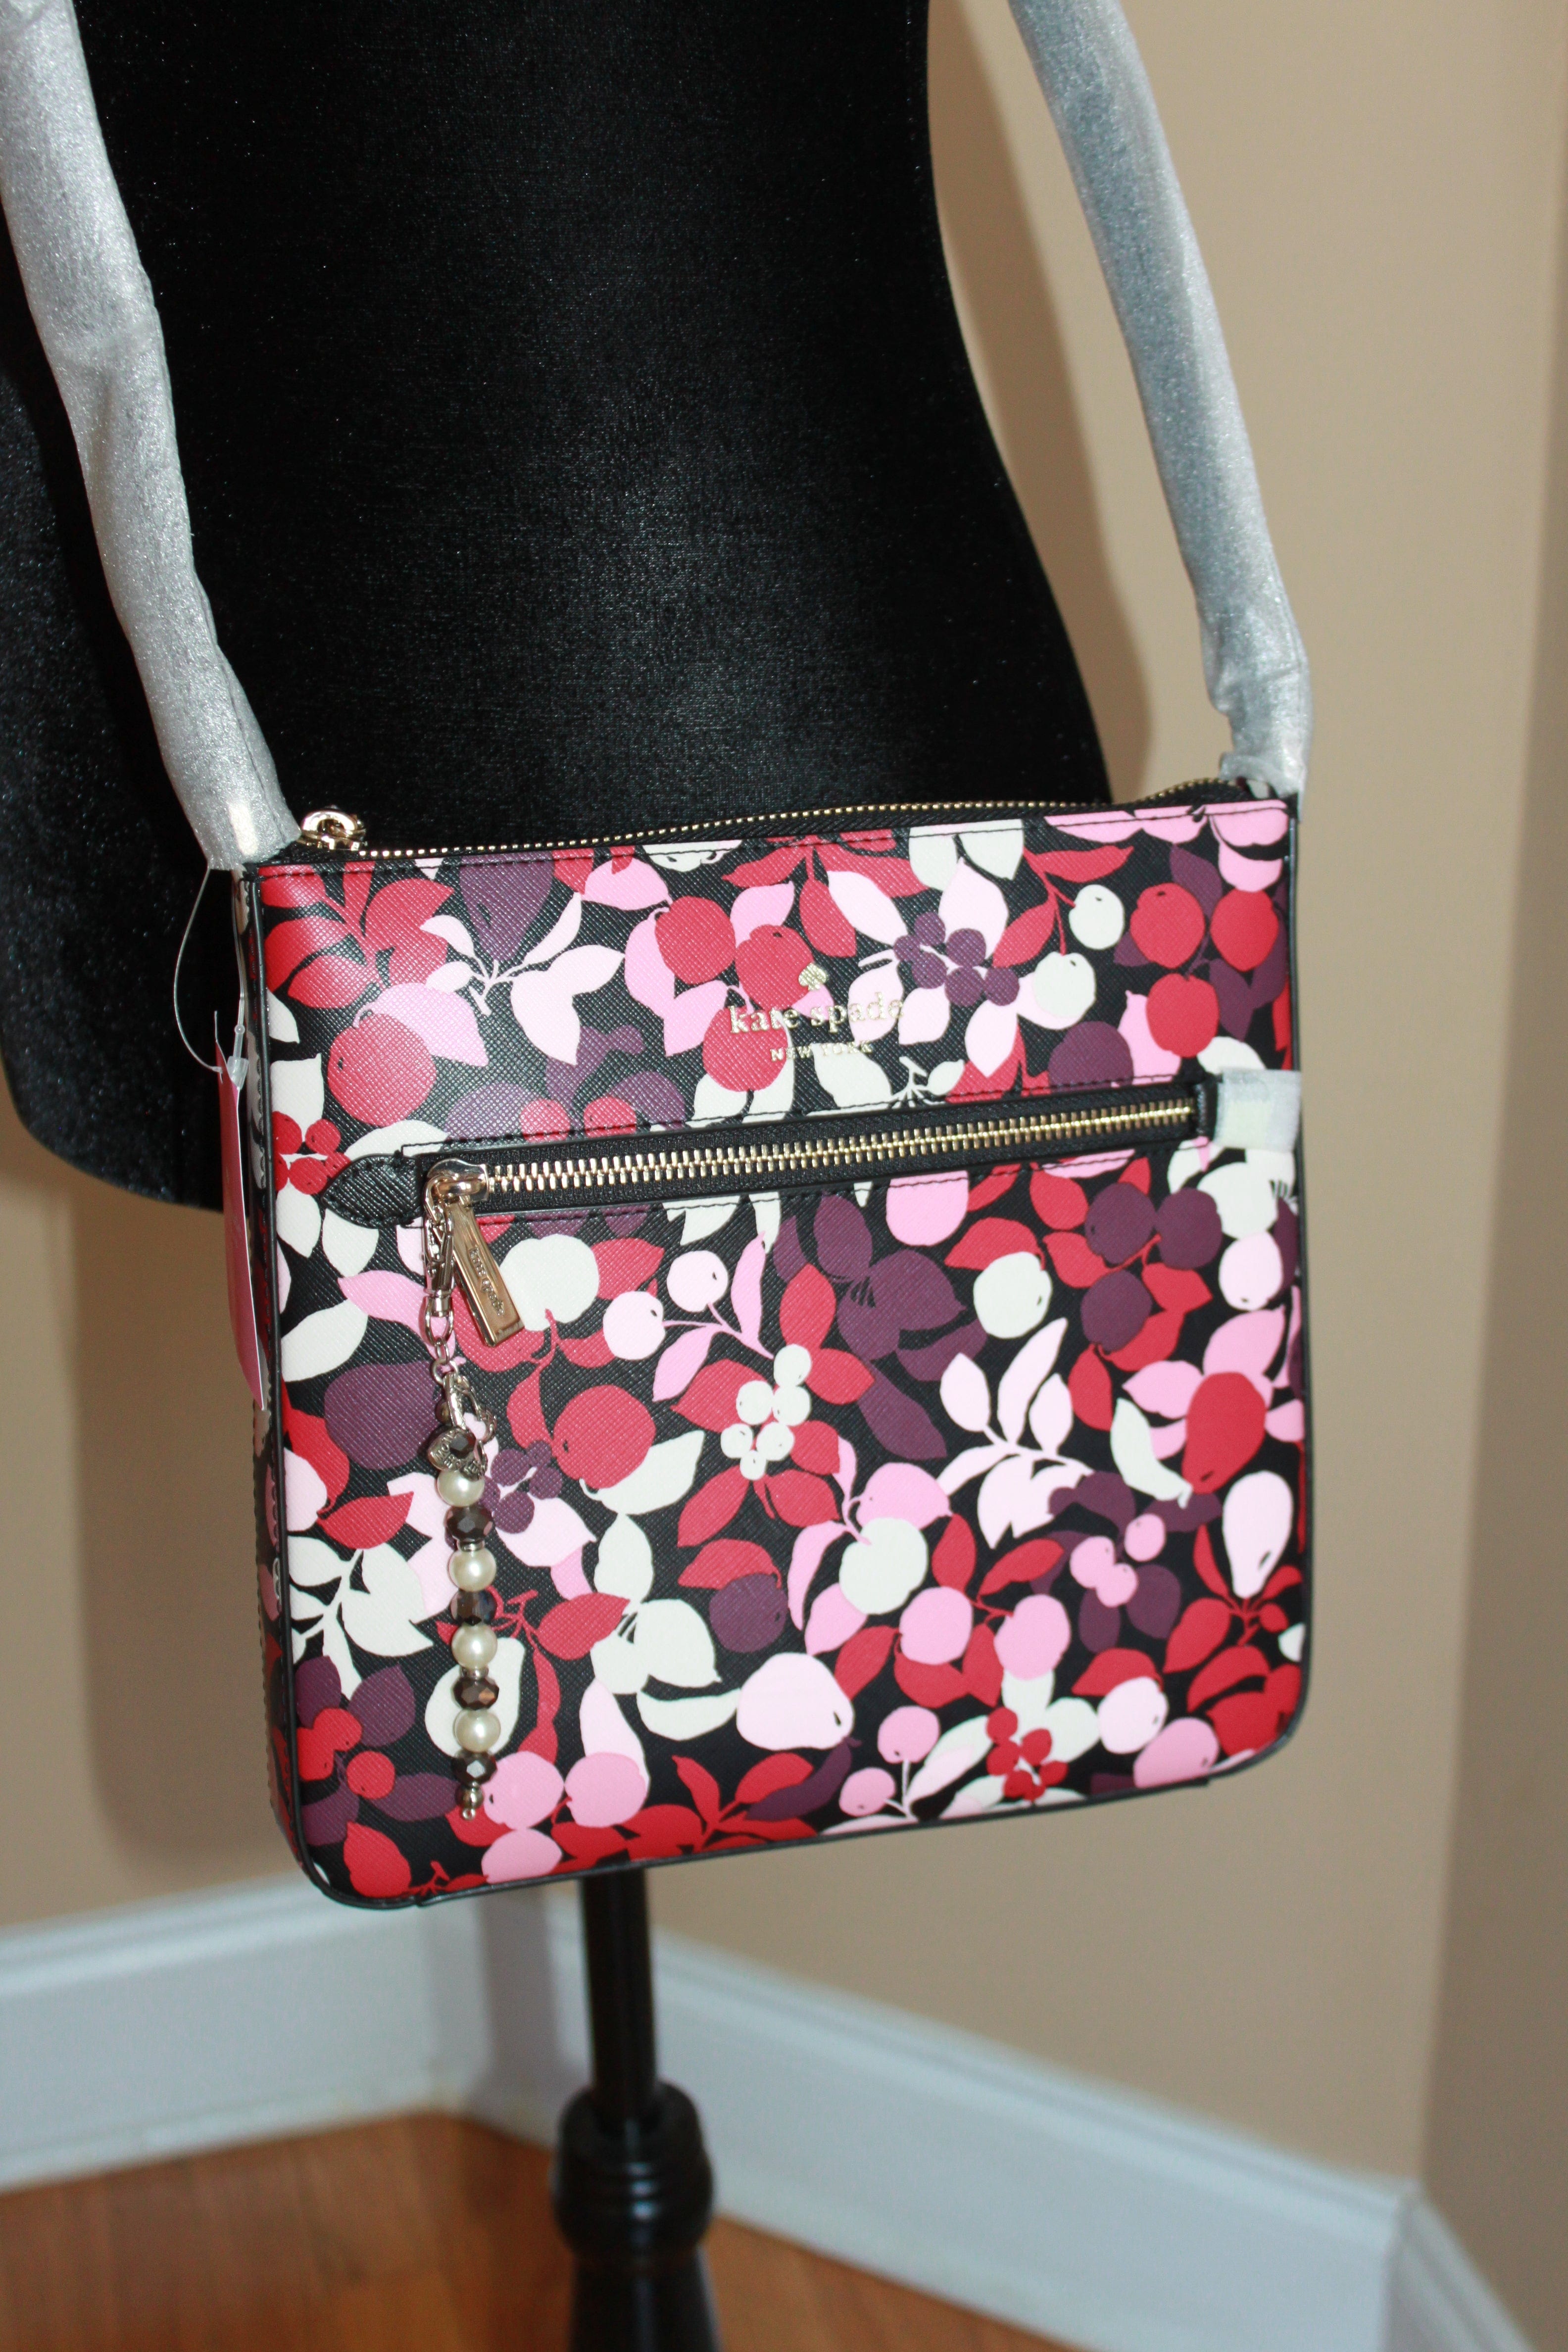 Kate Spade New York Cream & Pink Floral North South Leather